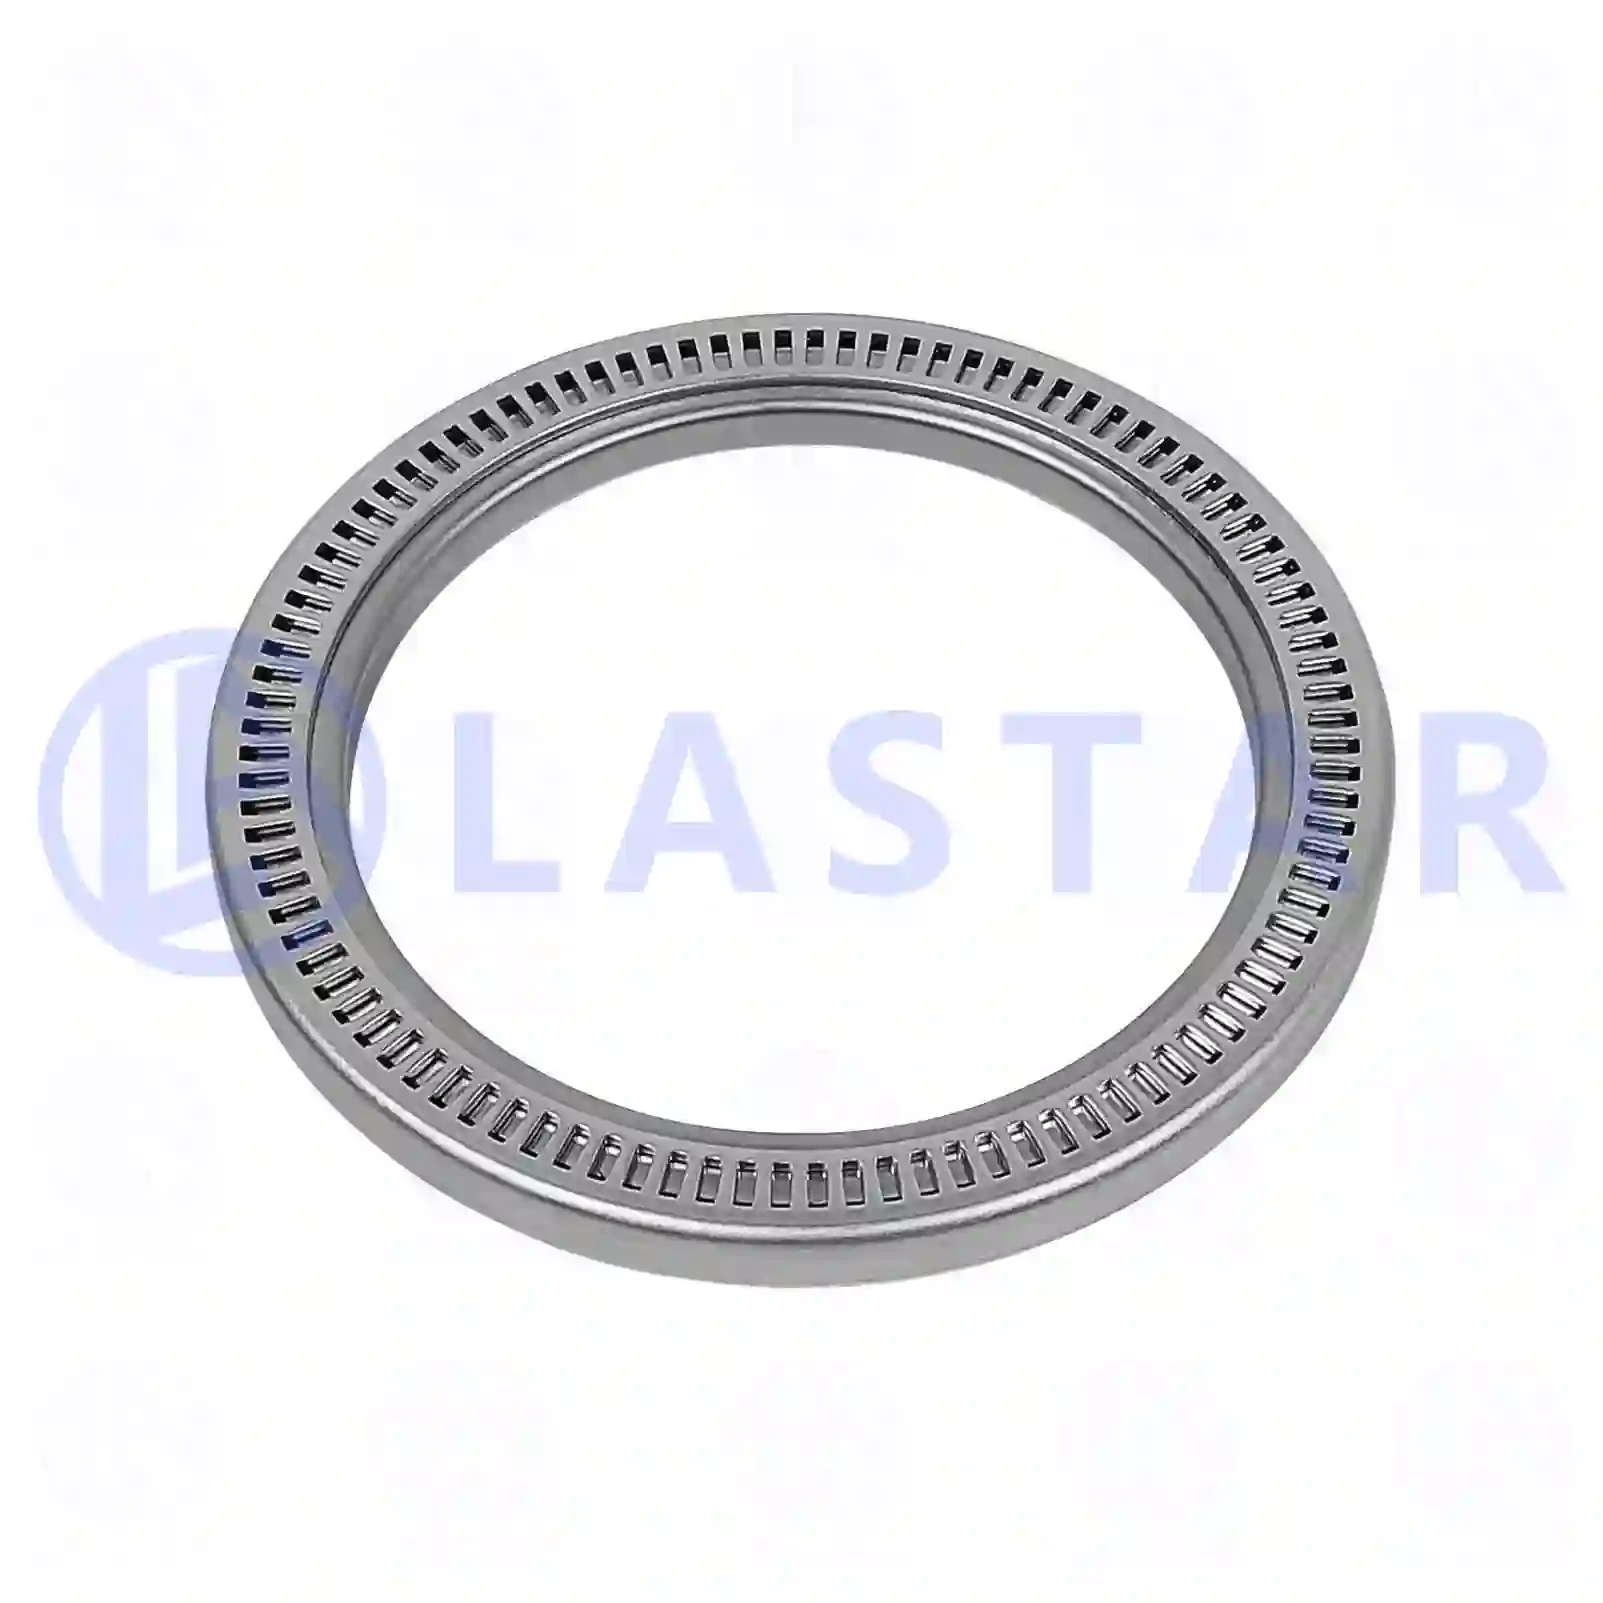 Oil seal, with ABS ring, 77726089, 500023256, 36965030017, 1850981, 2494732, ZG02823-0008, ||  77726089 Lastar Spare Part | Truck Spare Parts, Auotomotive Spare Parts Oil seal, with ABS ring, 77726089, 500023256, 36965030017, 1850981, 2494732, ZG02823-0008, ||  77726089 Lastar Spare Part | Truck Spare Parts, Auotomotive Spare Parts